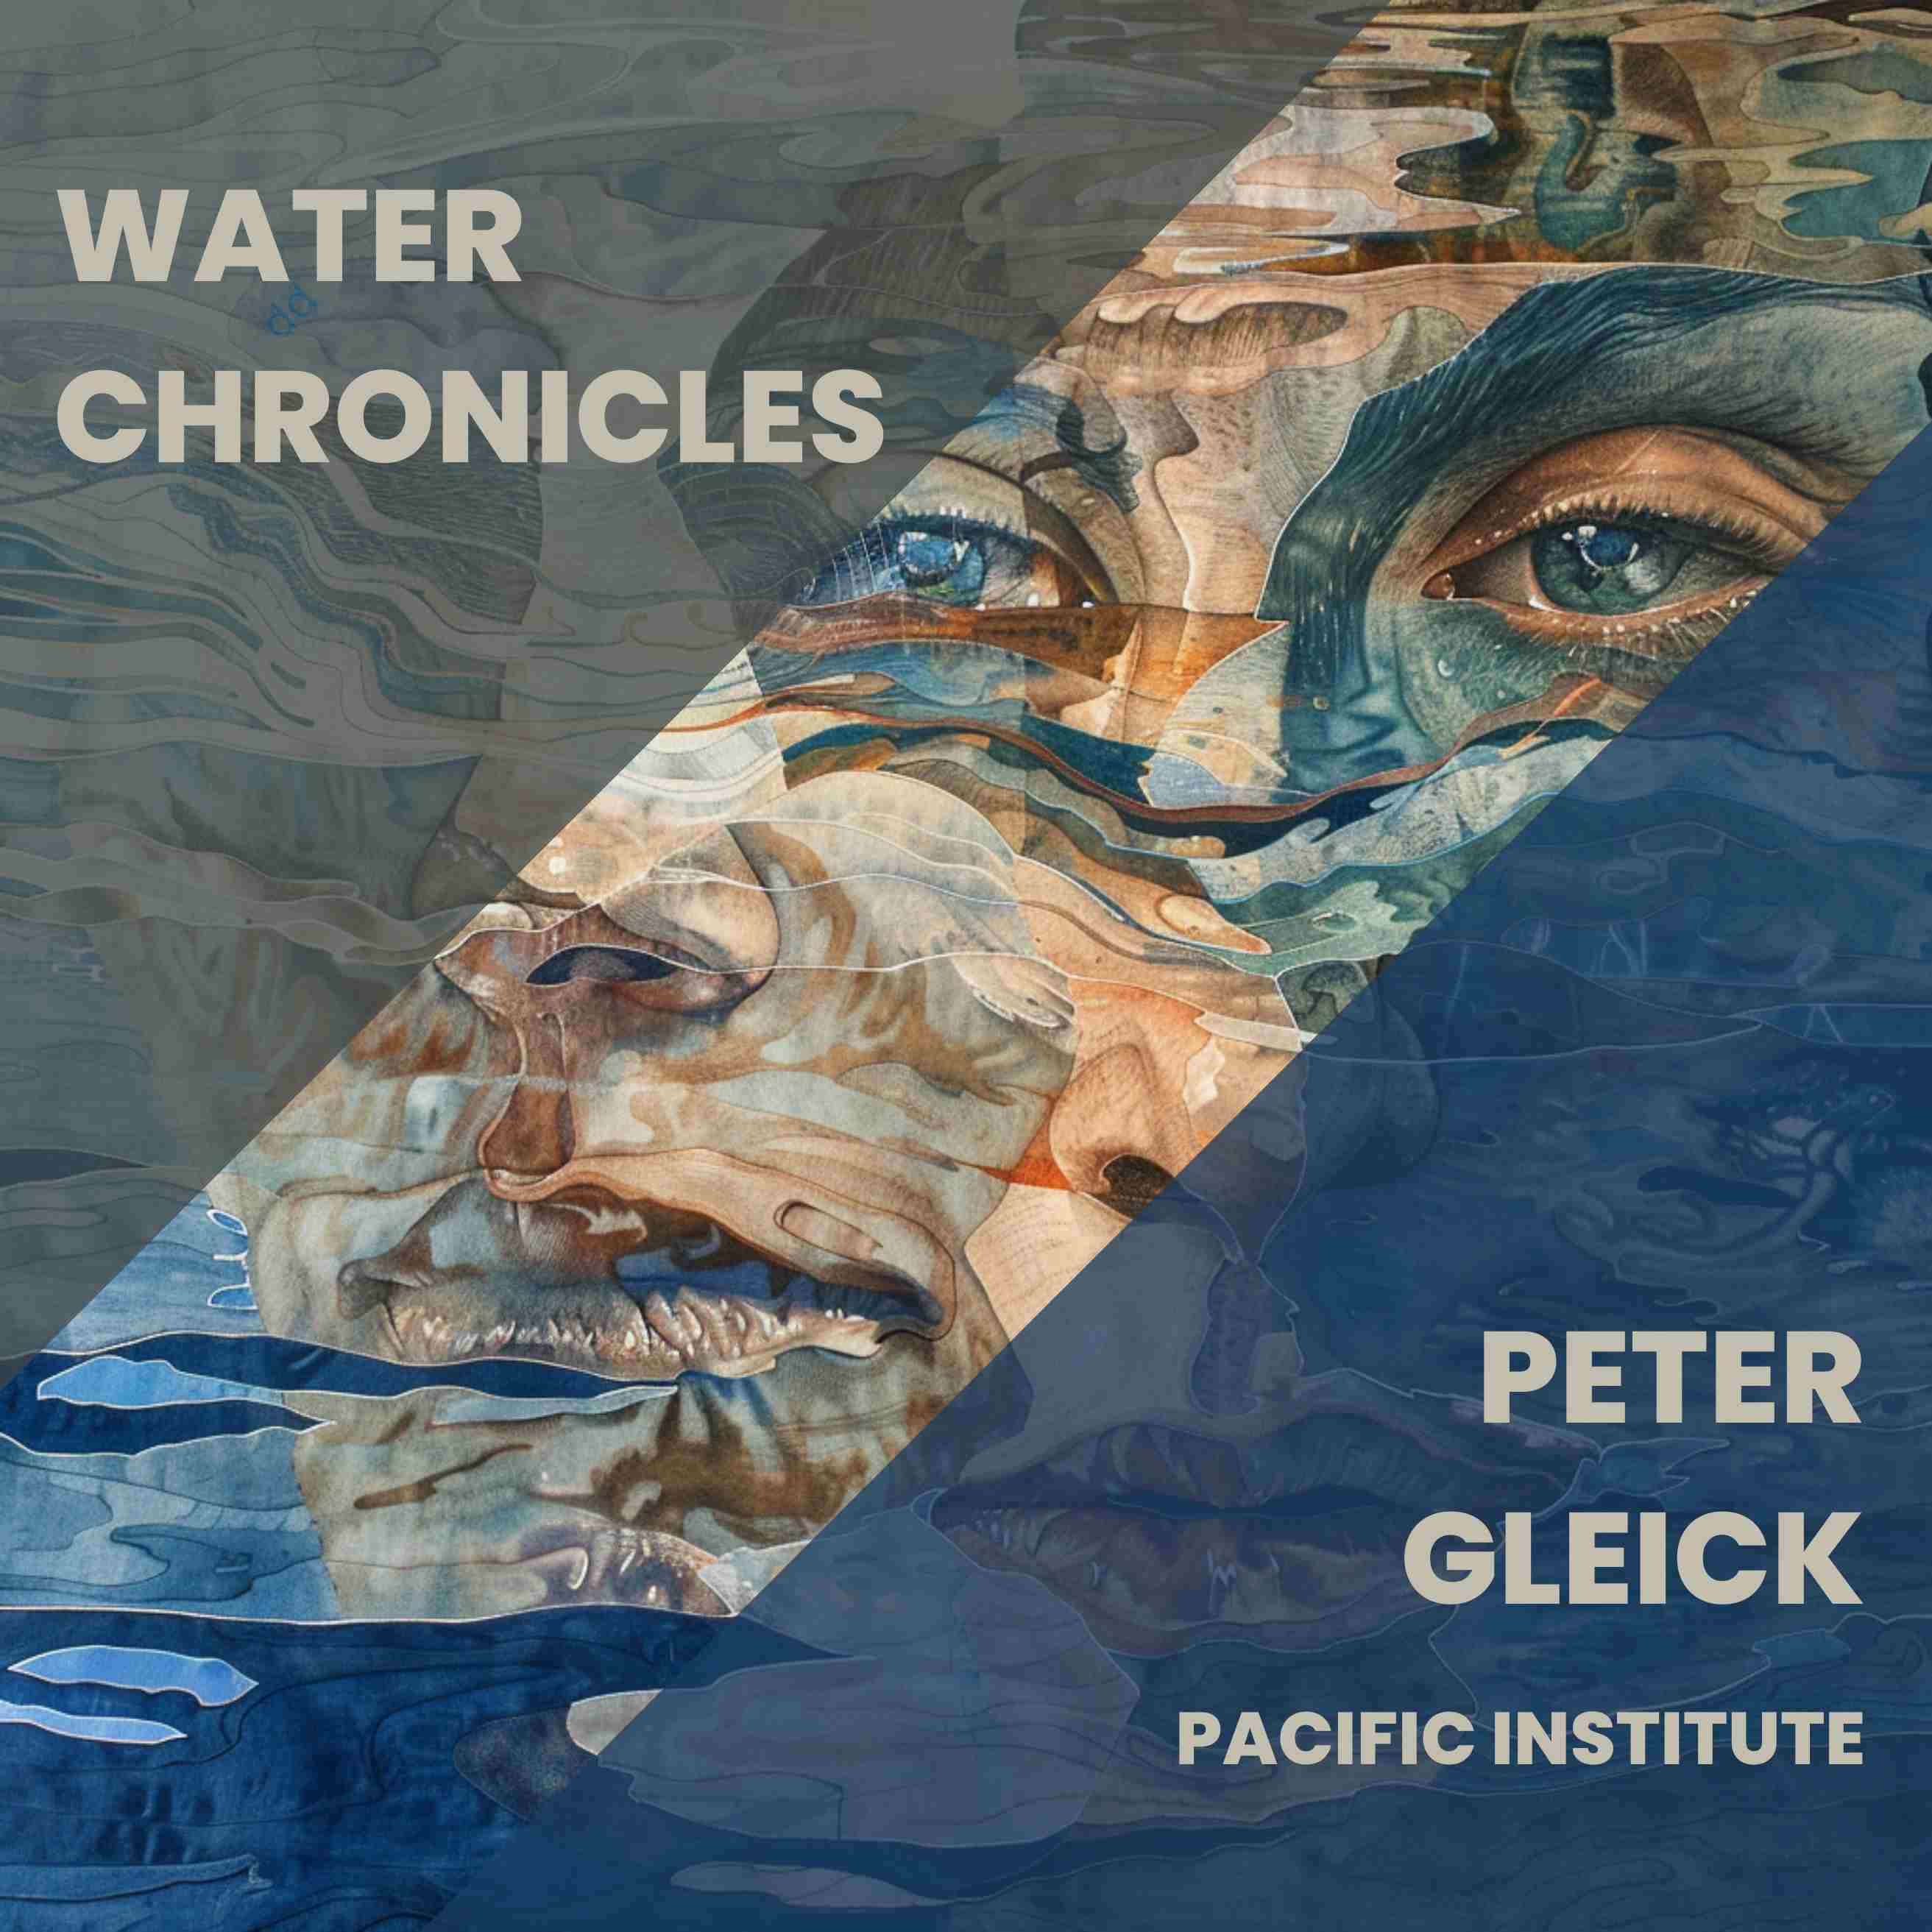 Water Chronicles and The Shocking Truth About The Global Water Crisis